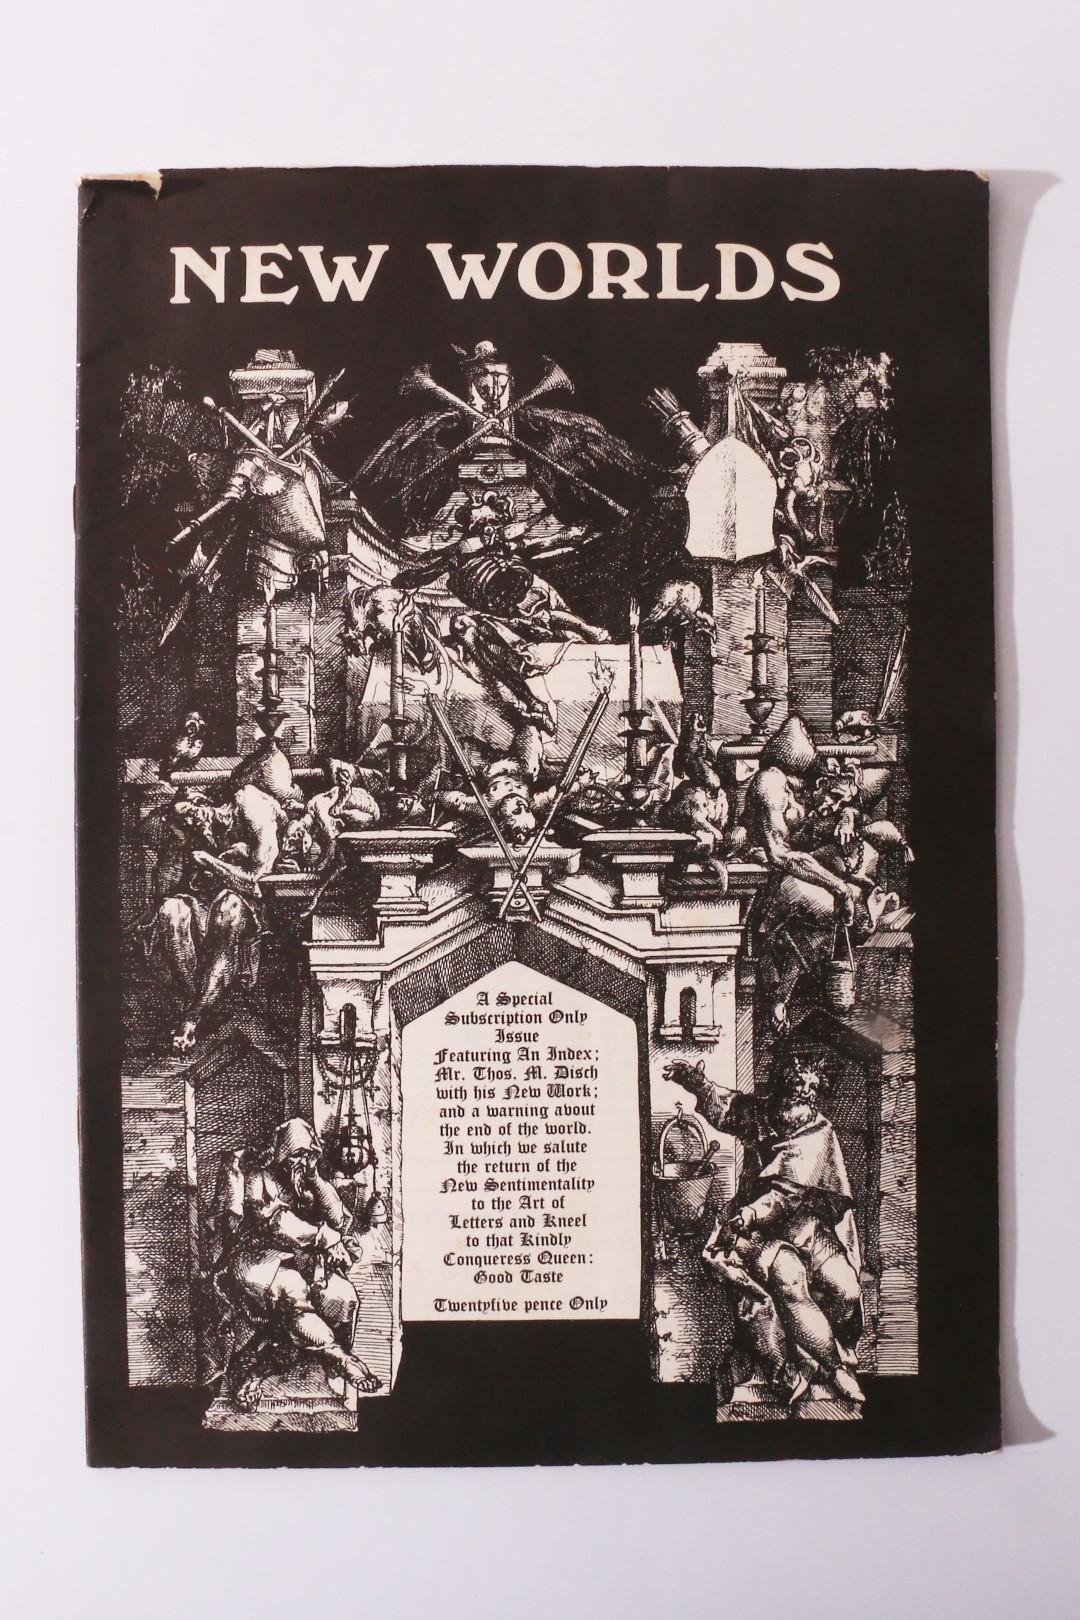 Michael Moorcock [ed.] - New Worlds No. 201 - Special Good Taste Issue - New World Publishing, 1971, First Edition.